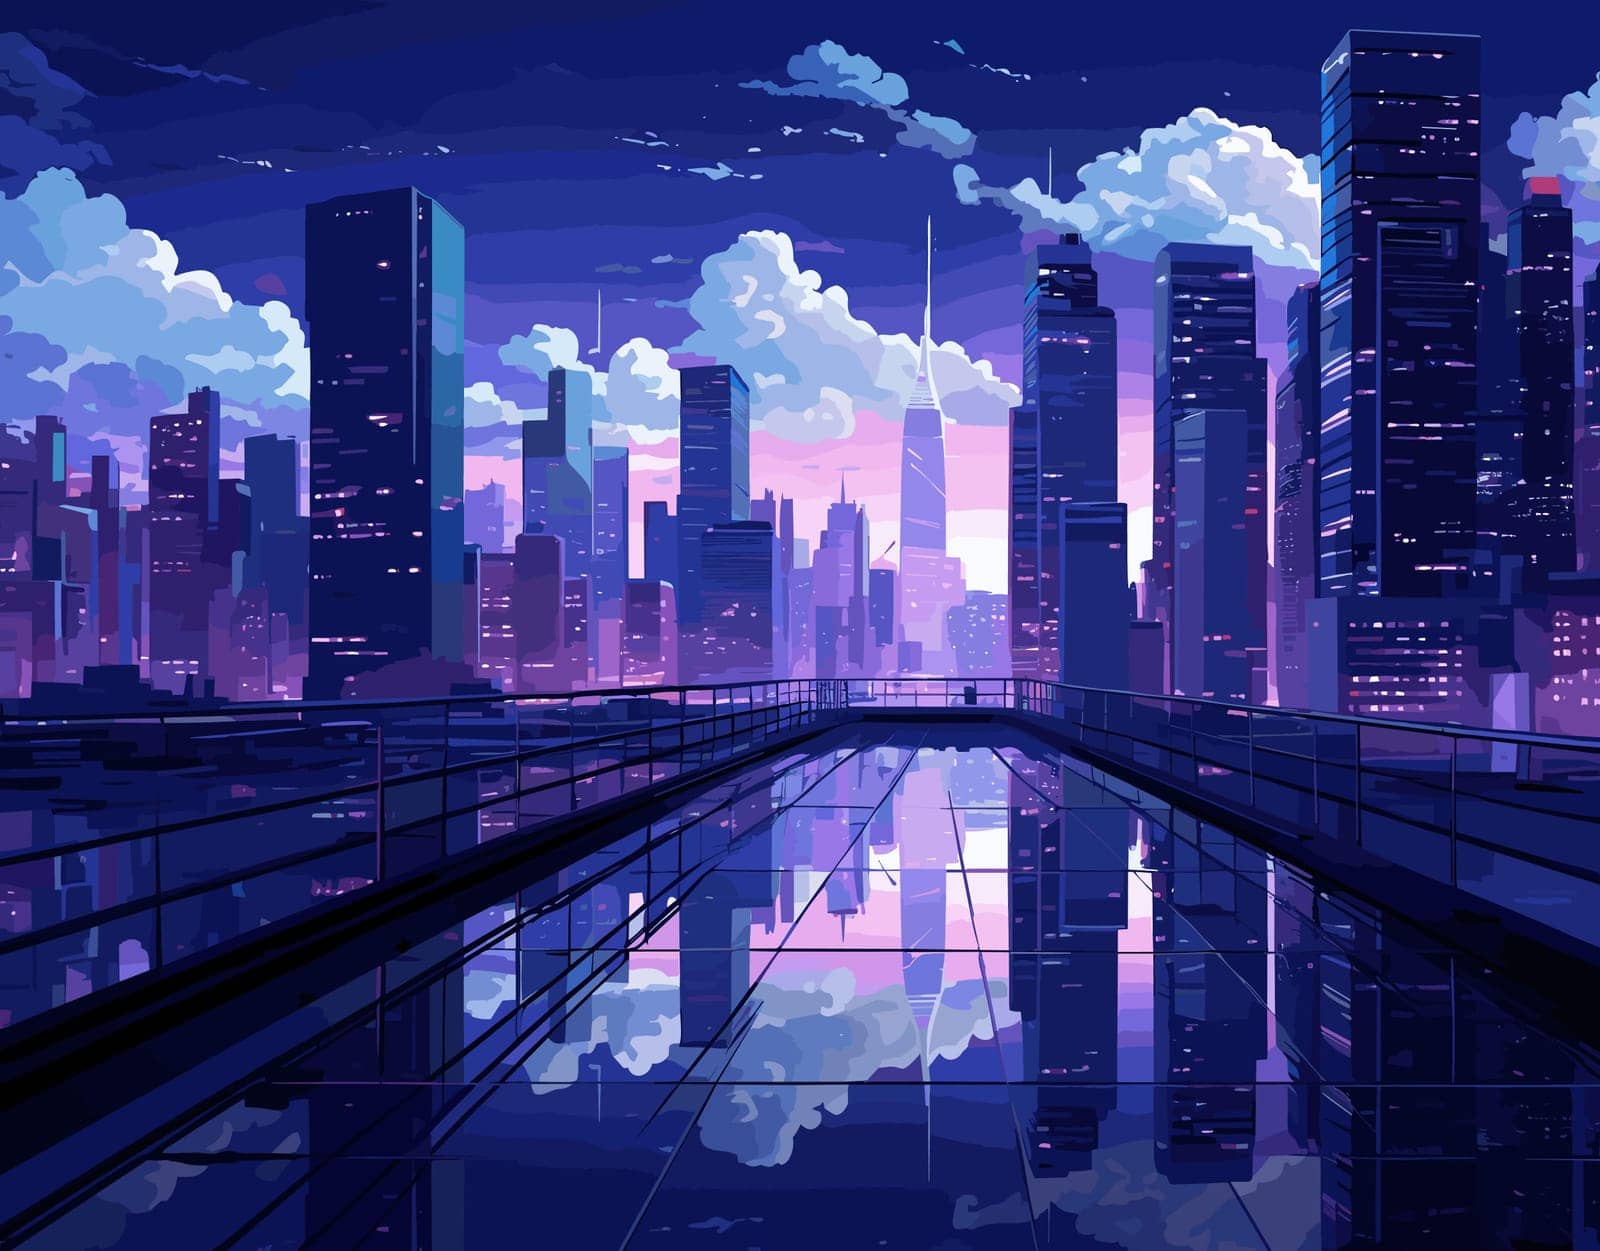 Digital illustration showcases a cityscape during twilight from an elevated walkway perspective, emphasizing skyscrapers, reflections, and clouds